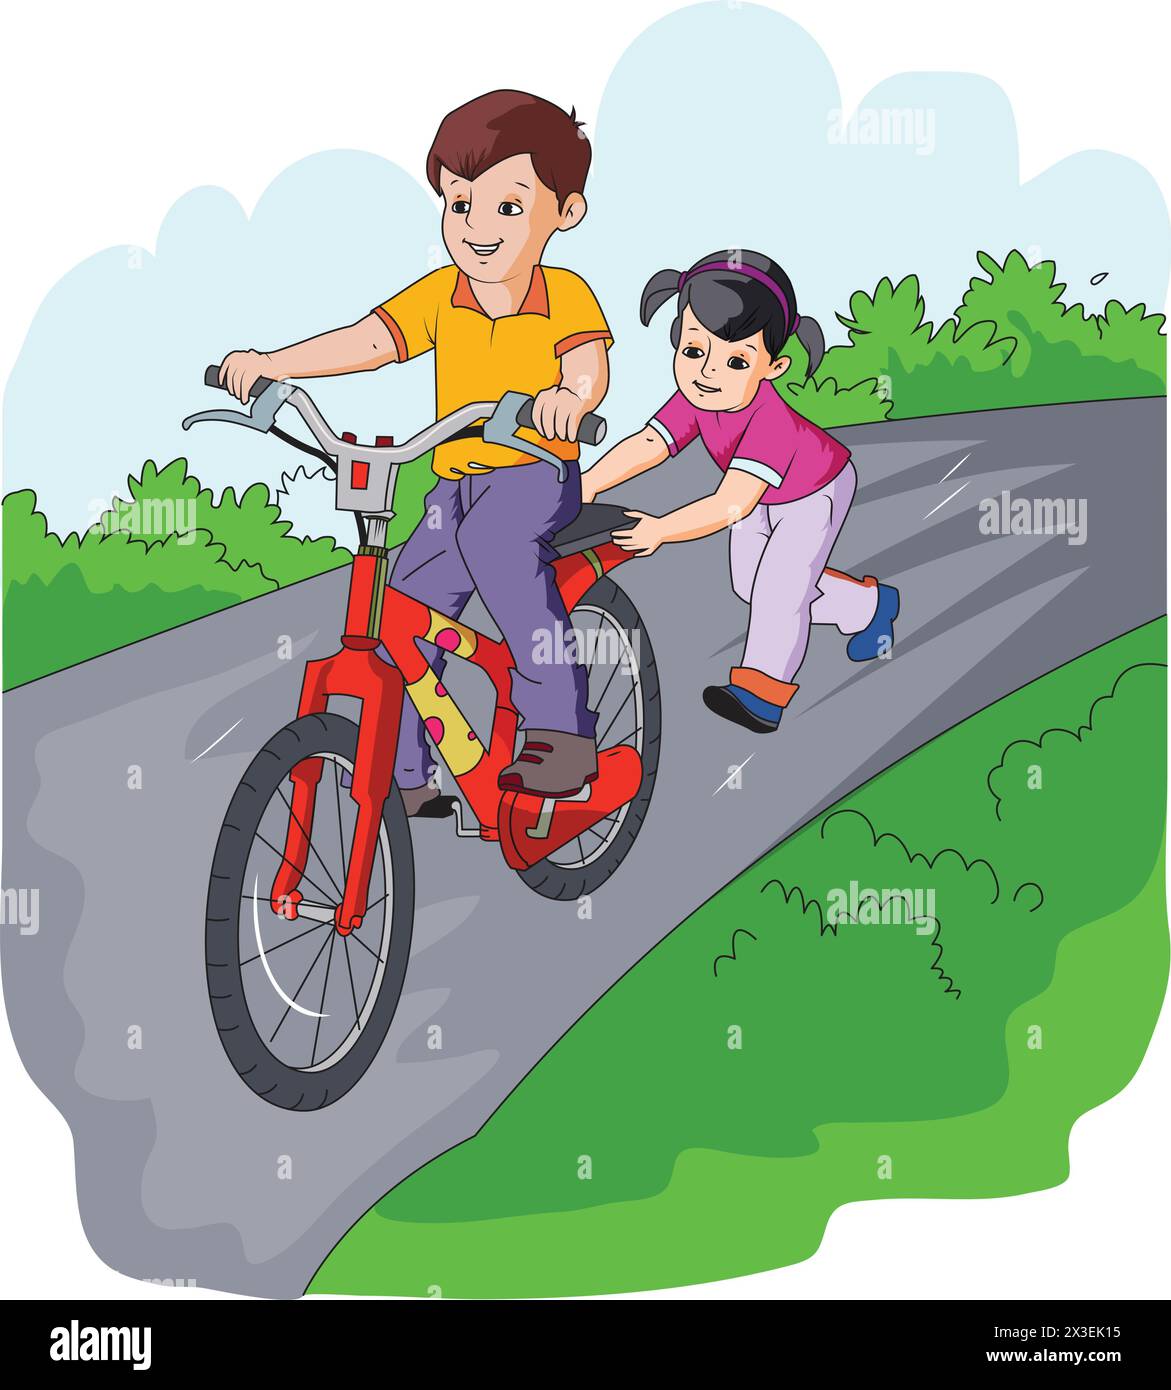 Boy Riding a Bicycle with Girl Vector Illustration Stock Vector